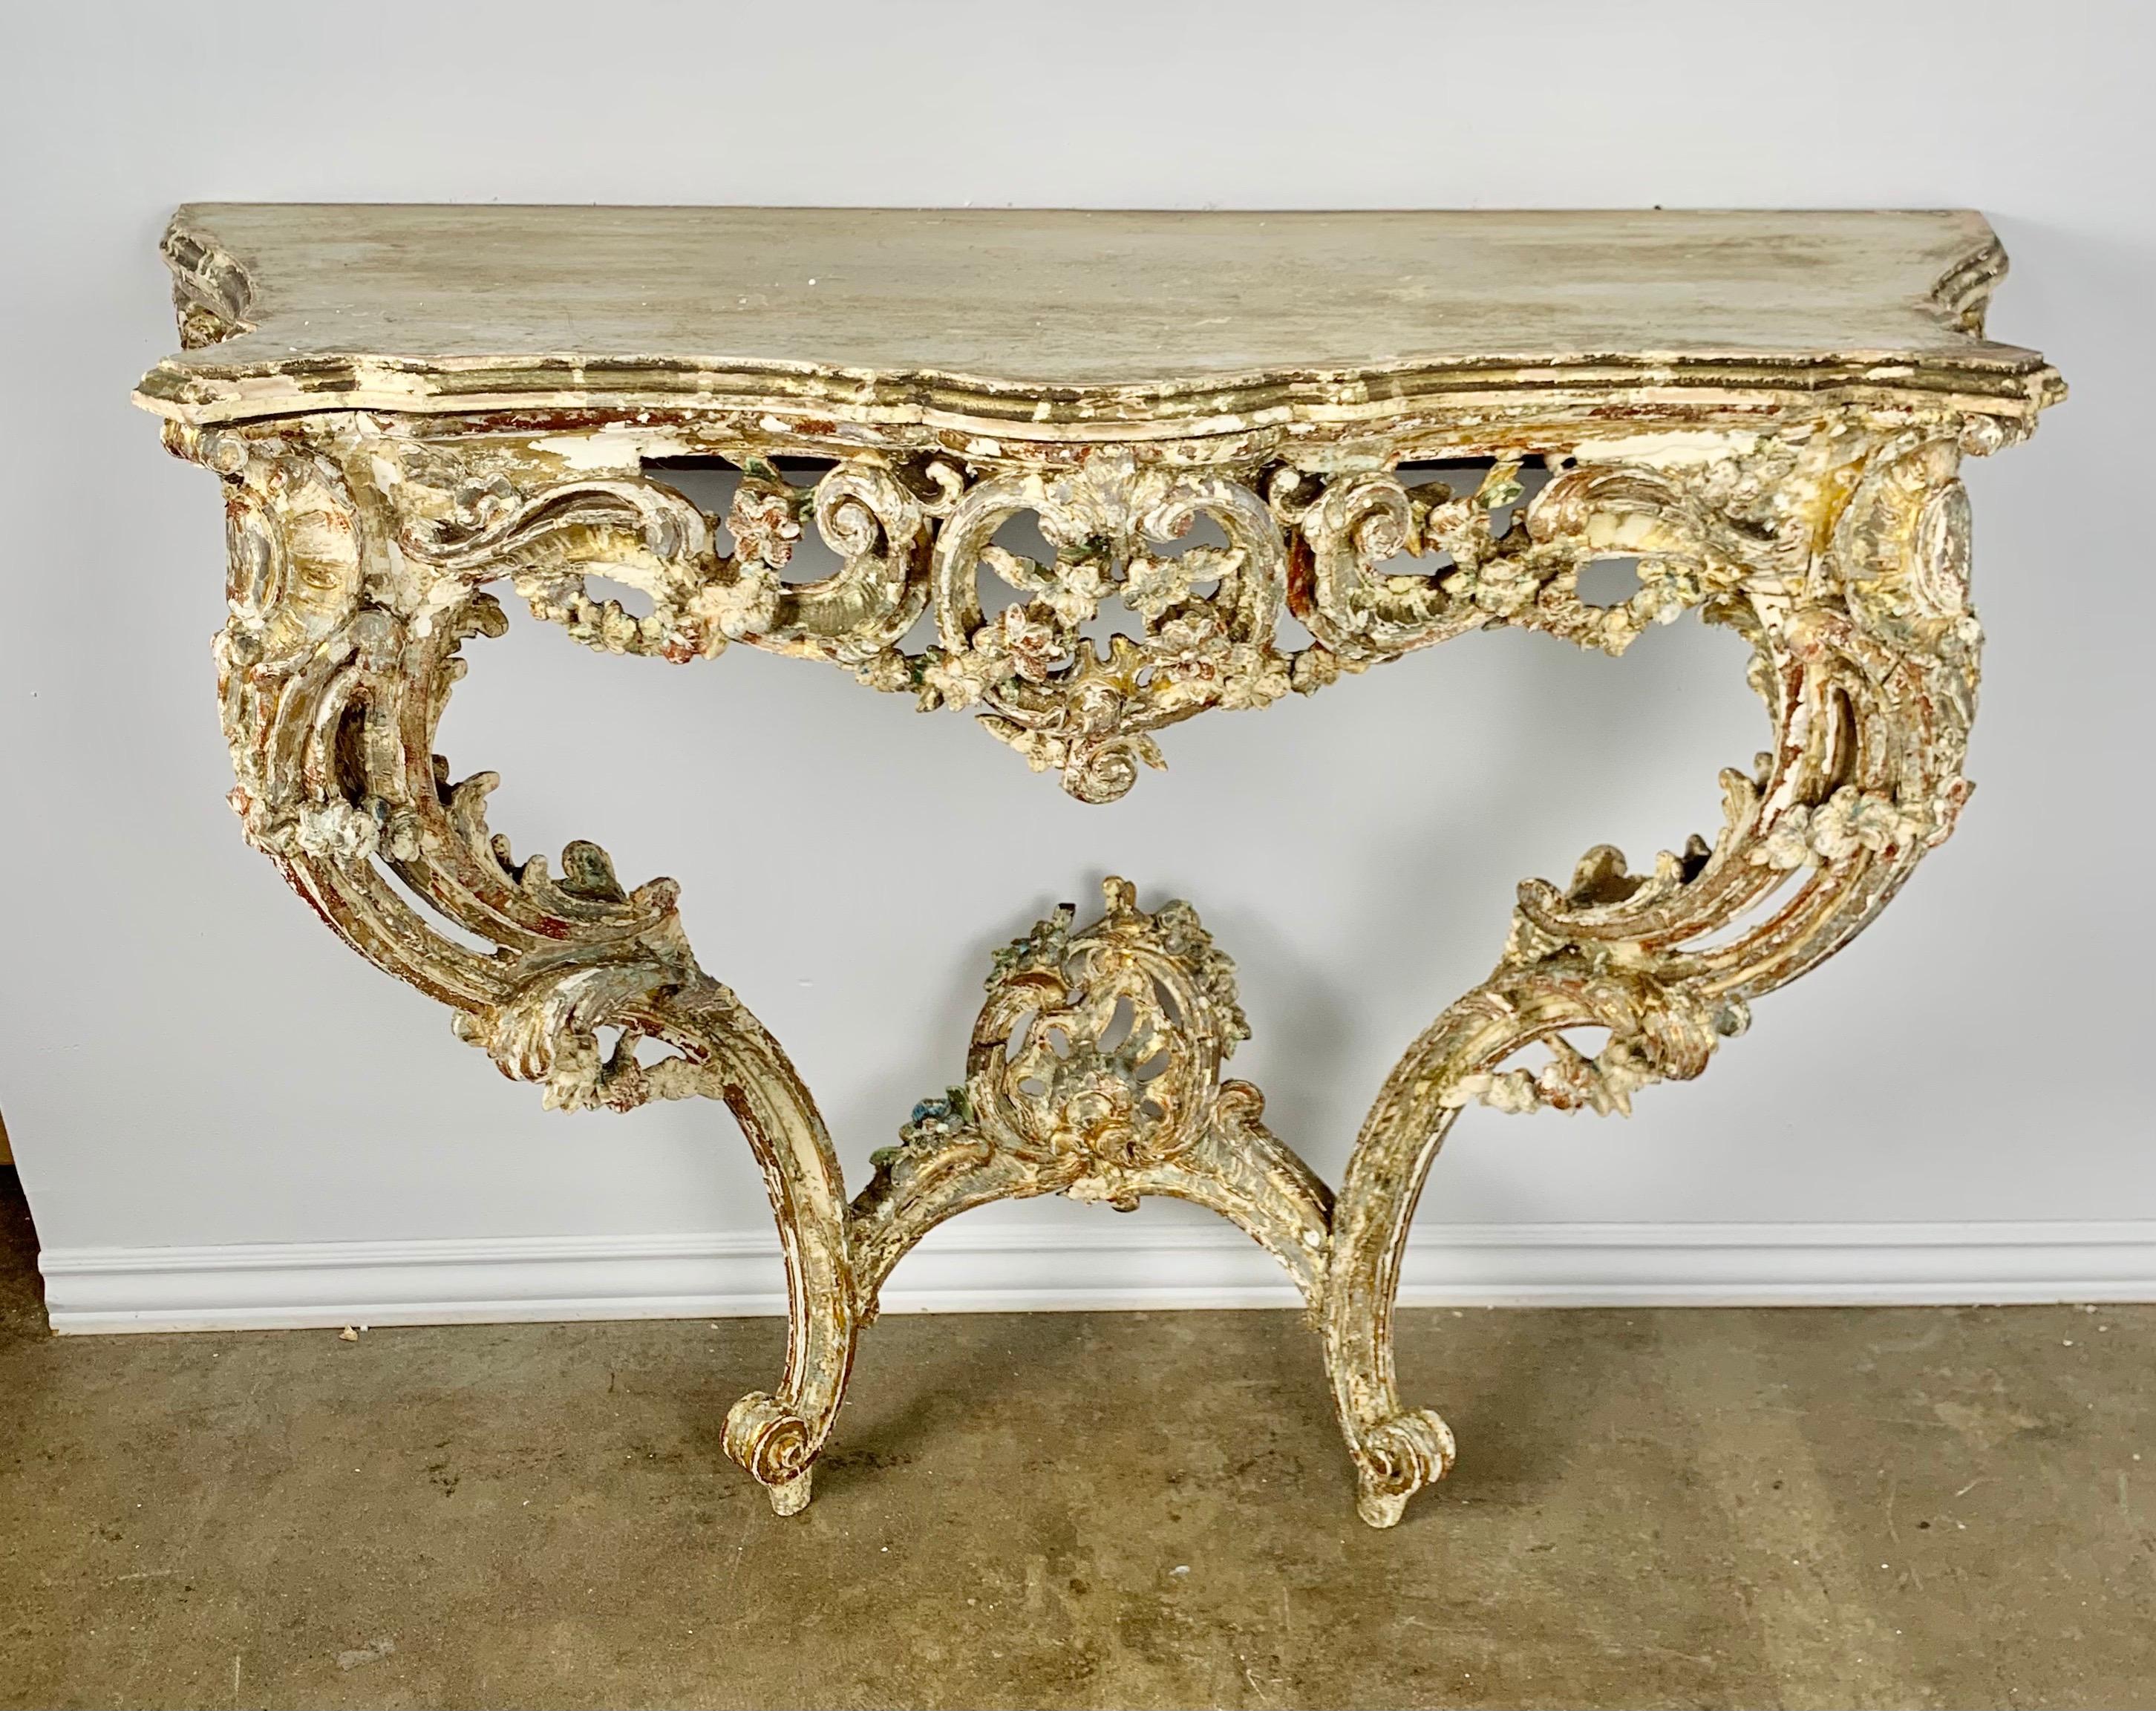 French Louis XV style painted & parcel gold gilt console standing on two cabriole legs connected by a center stretcher with finial. The finish is beautifully worn, showing the wood underneath. Wood Top.